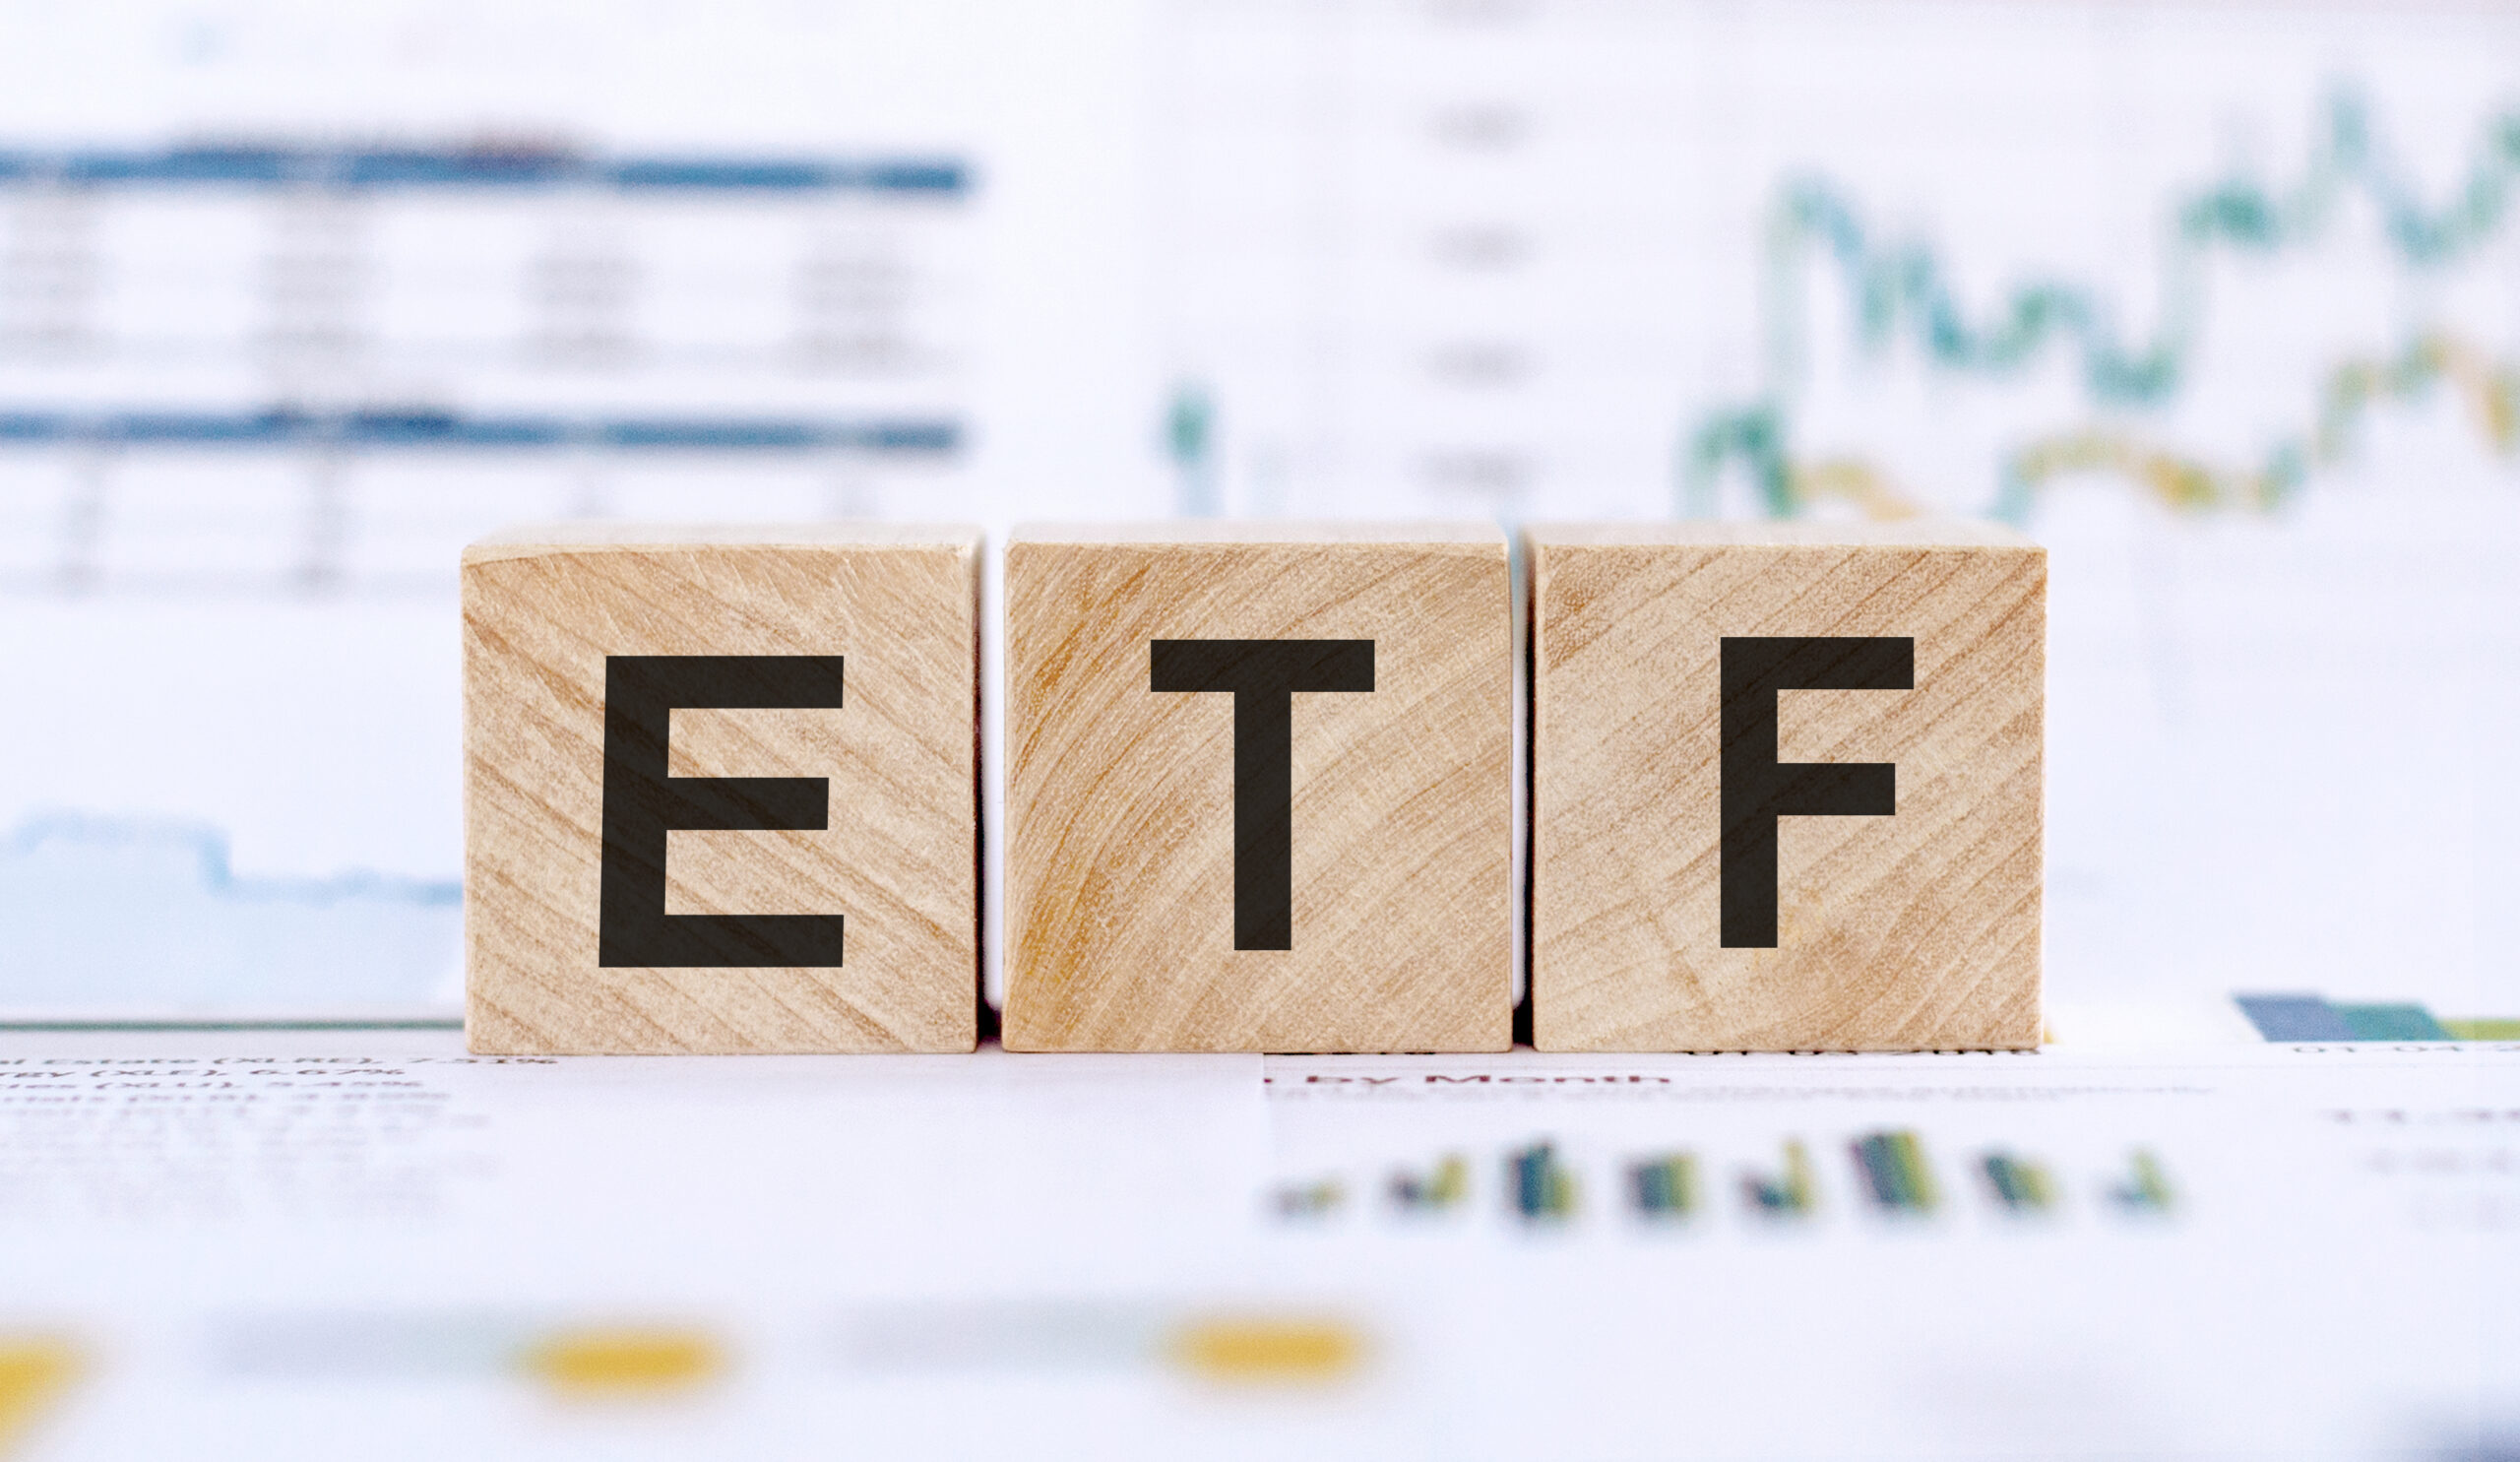 Which global equity ETF has made a triple-digit return this year?